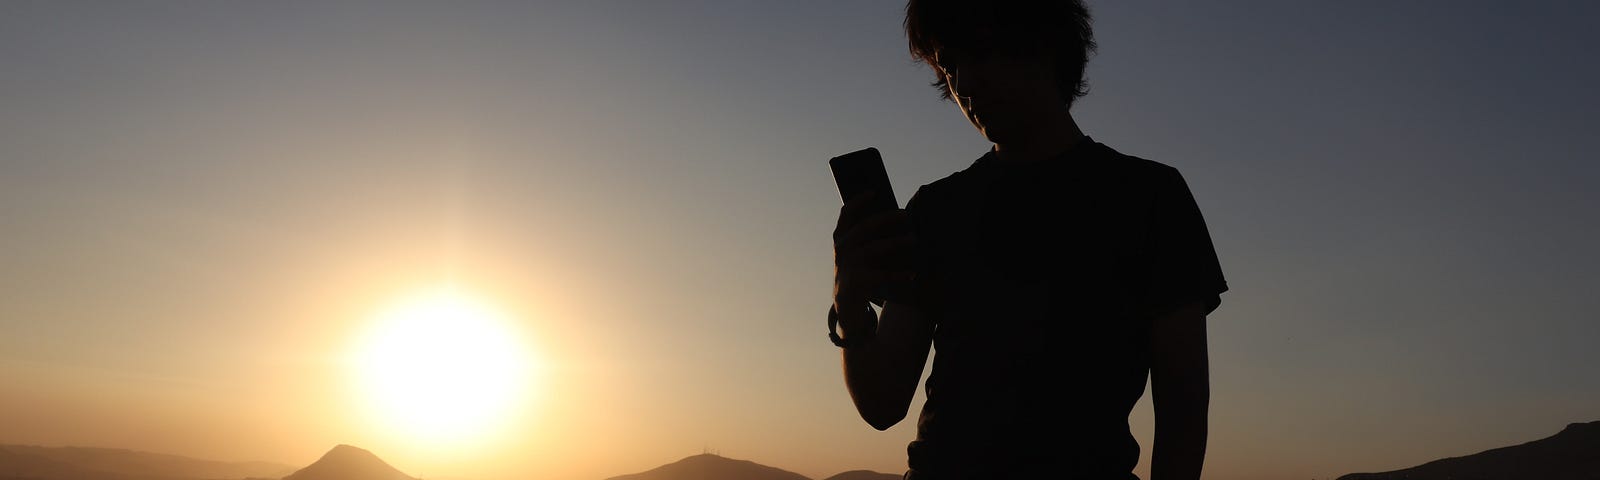 silhouette of a man looking at his phone instead of the sunrise behind him